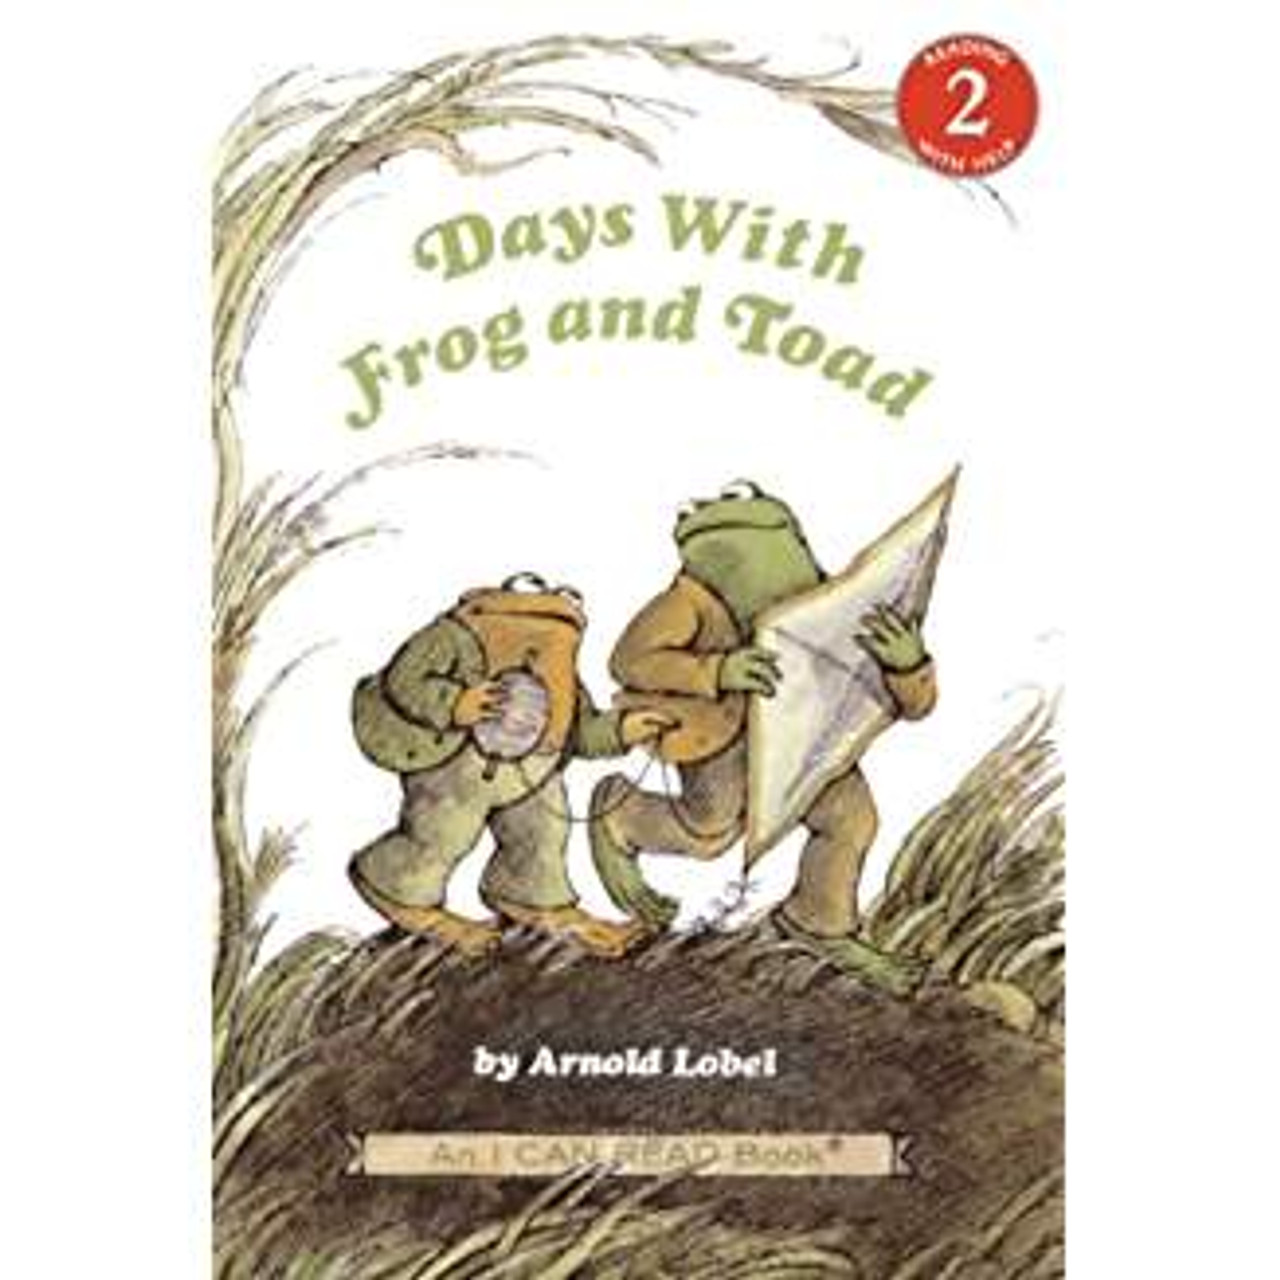 Frog and Toad spend their days together, but find sometimes it's nice to be alone.